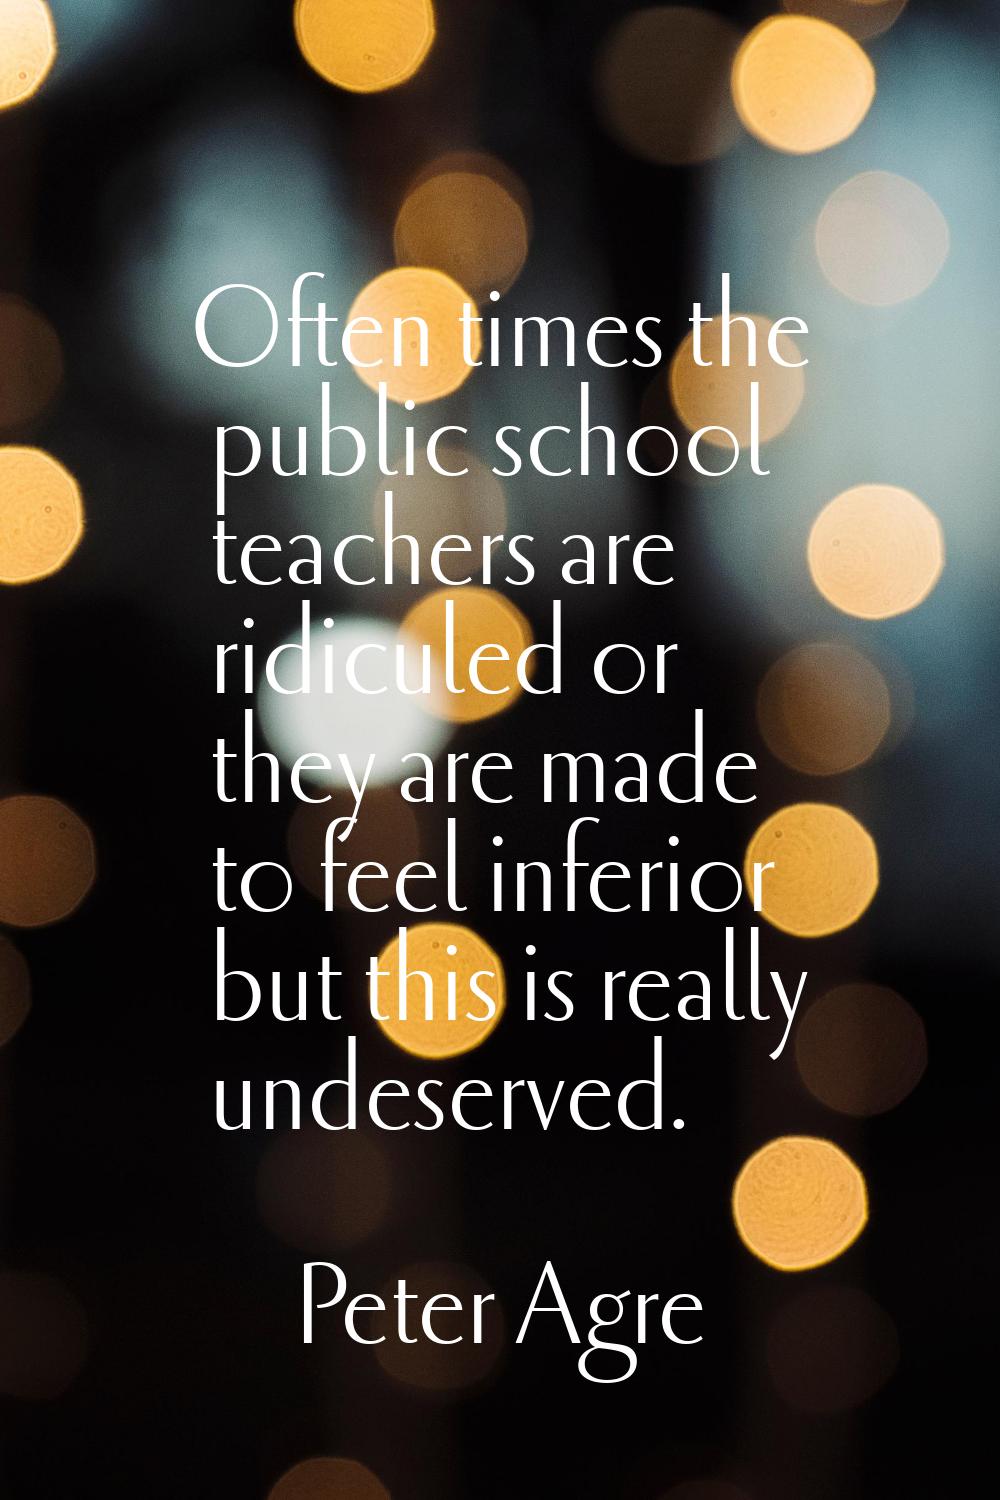 Often times the public school teachers are ridiculed or they are made to feel inferior but this is 